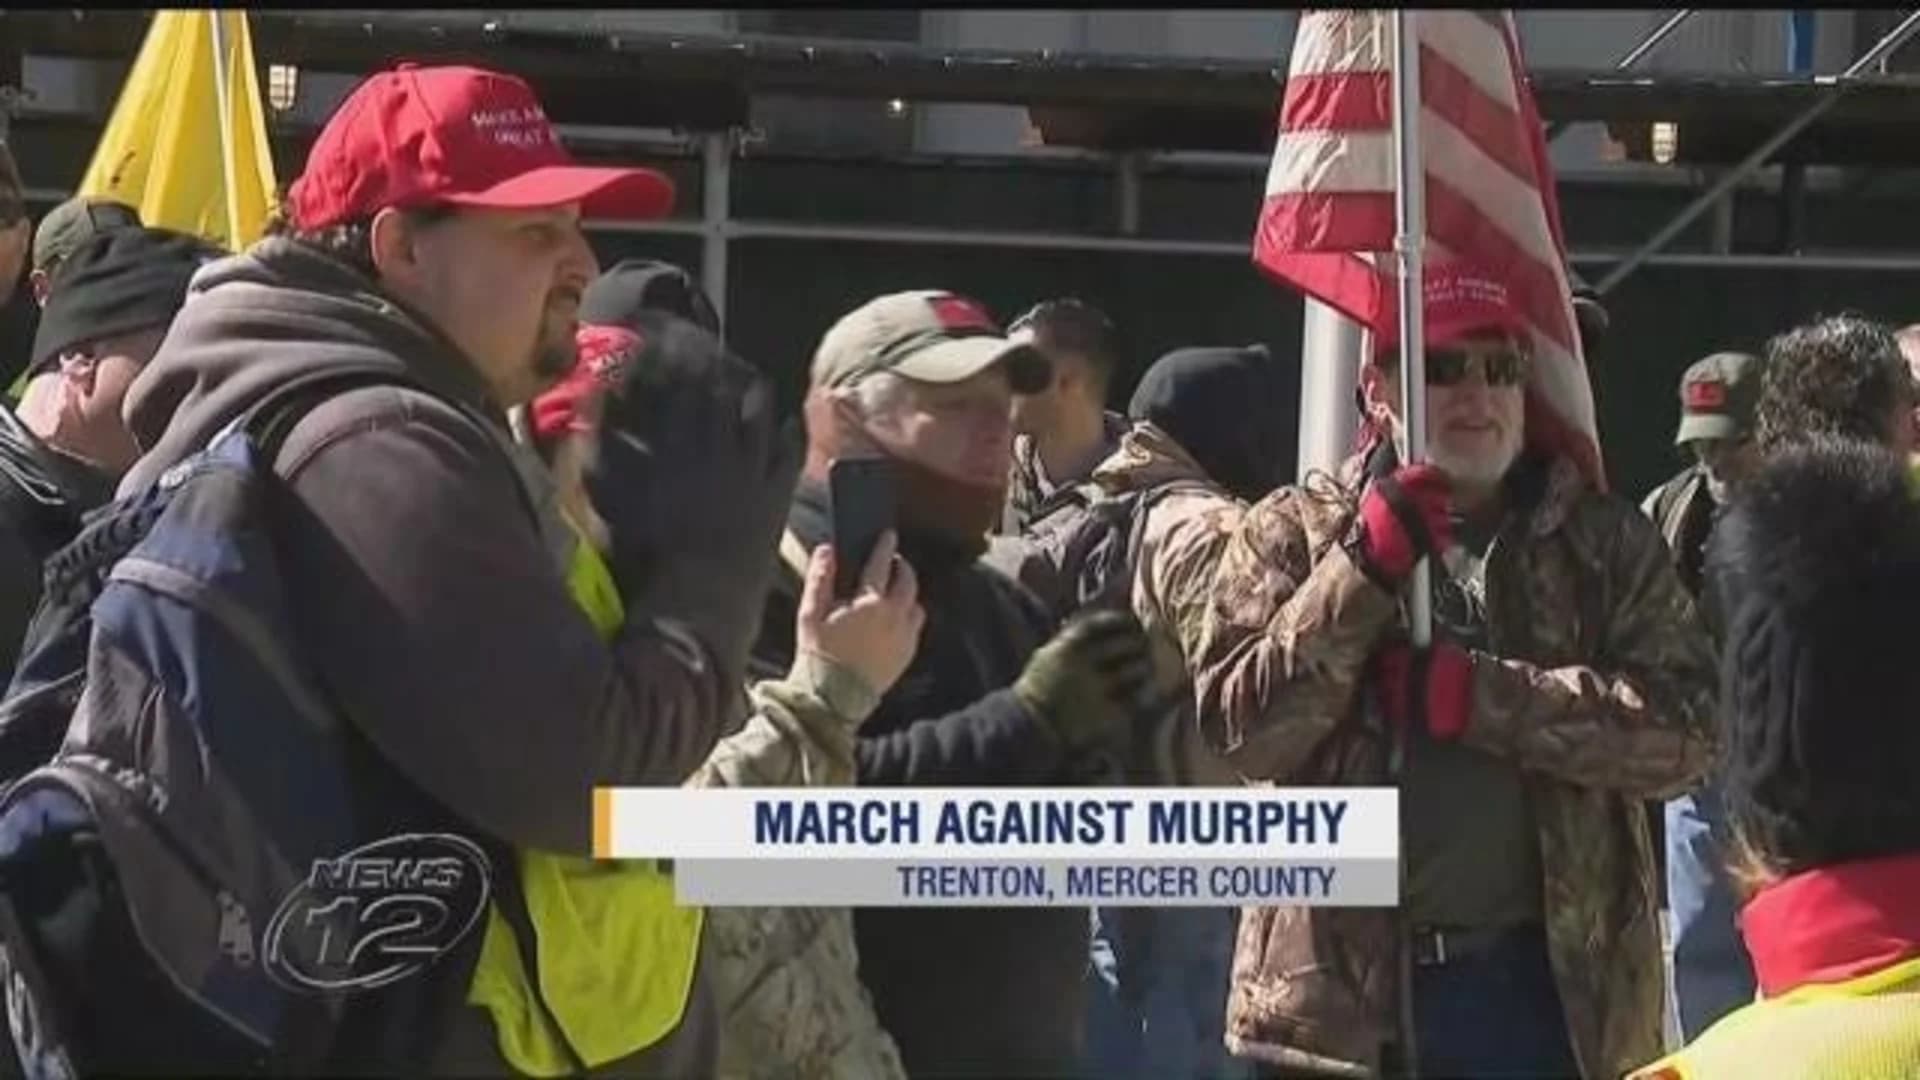 Hundreds descend on Trenton for ‘March Against Murphy’ protest